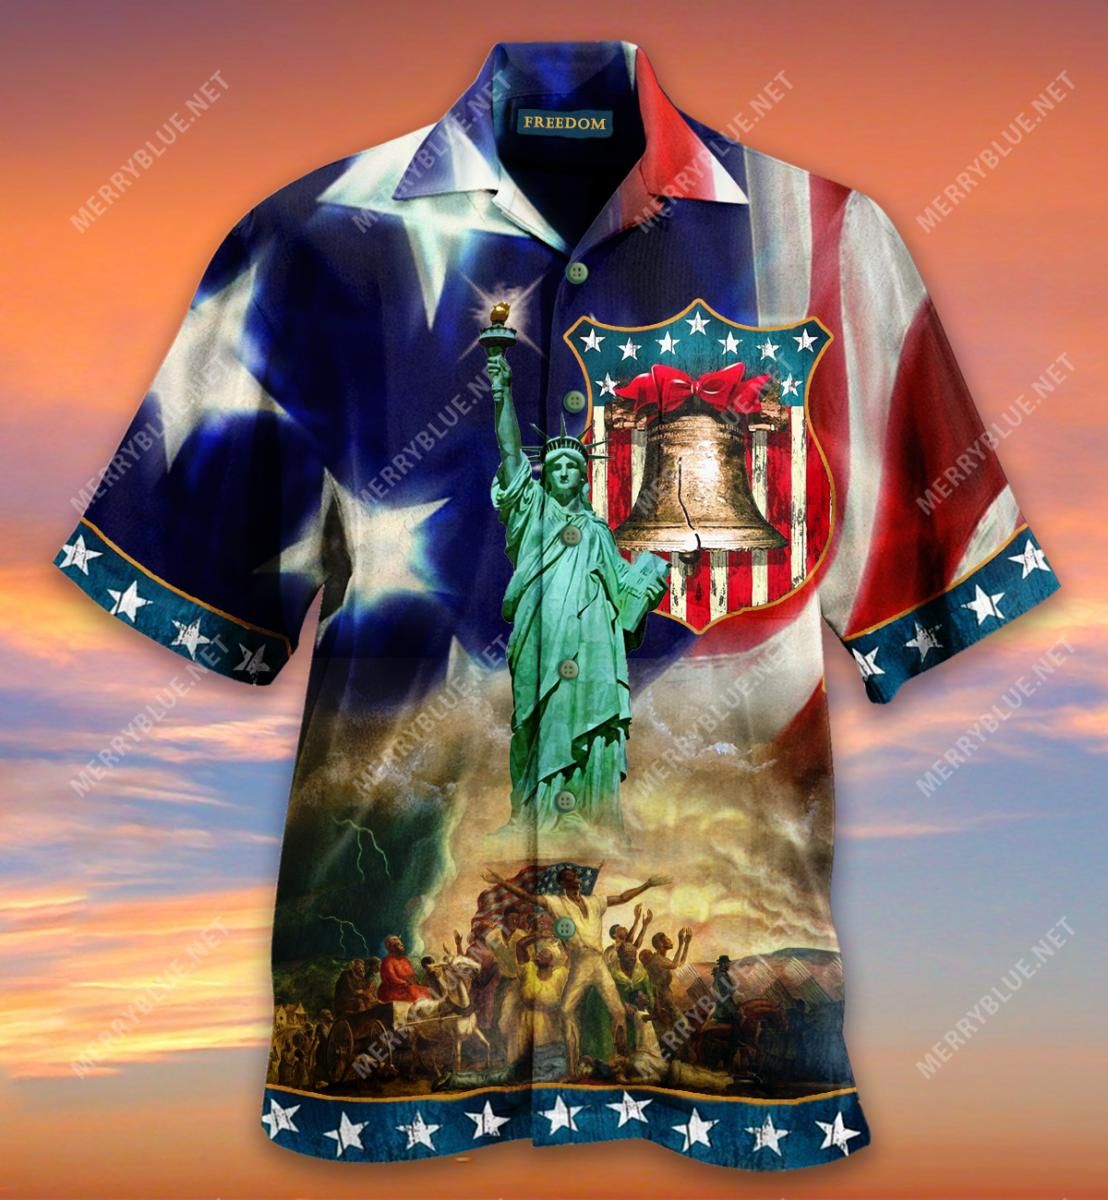 Such Slavery Is The Only Freedom Aloha Hawaiian Shirt Colorful Short Sleeve Summer Beach Casual Shirt For Men And Women